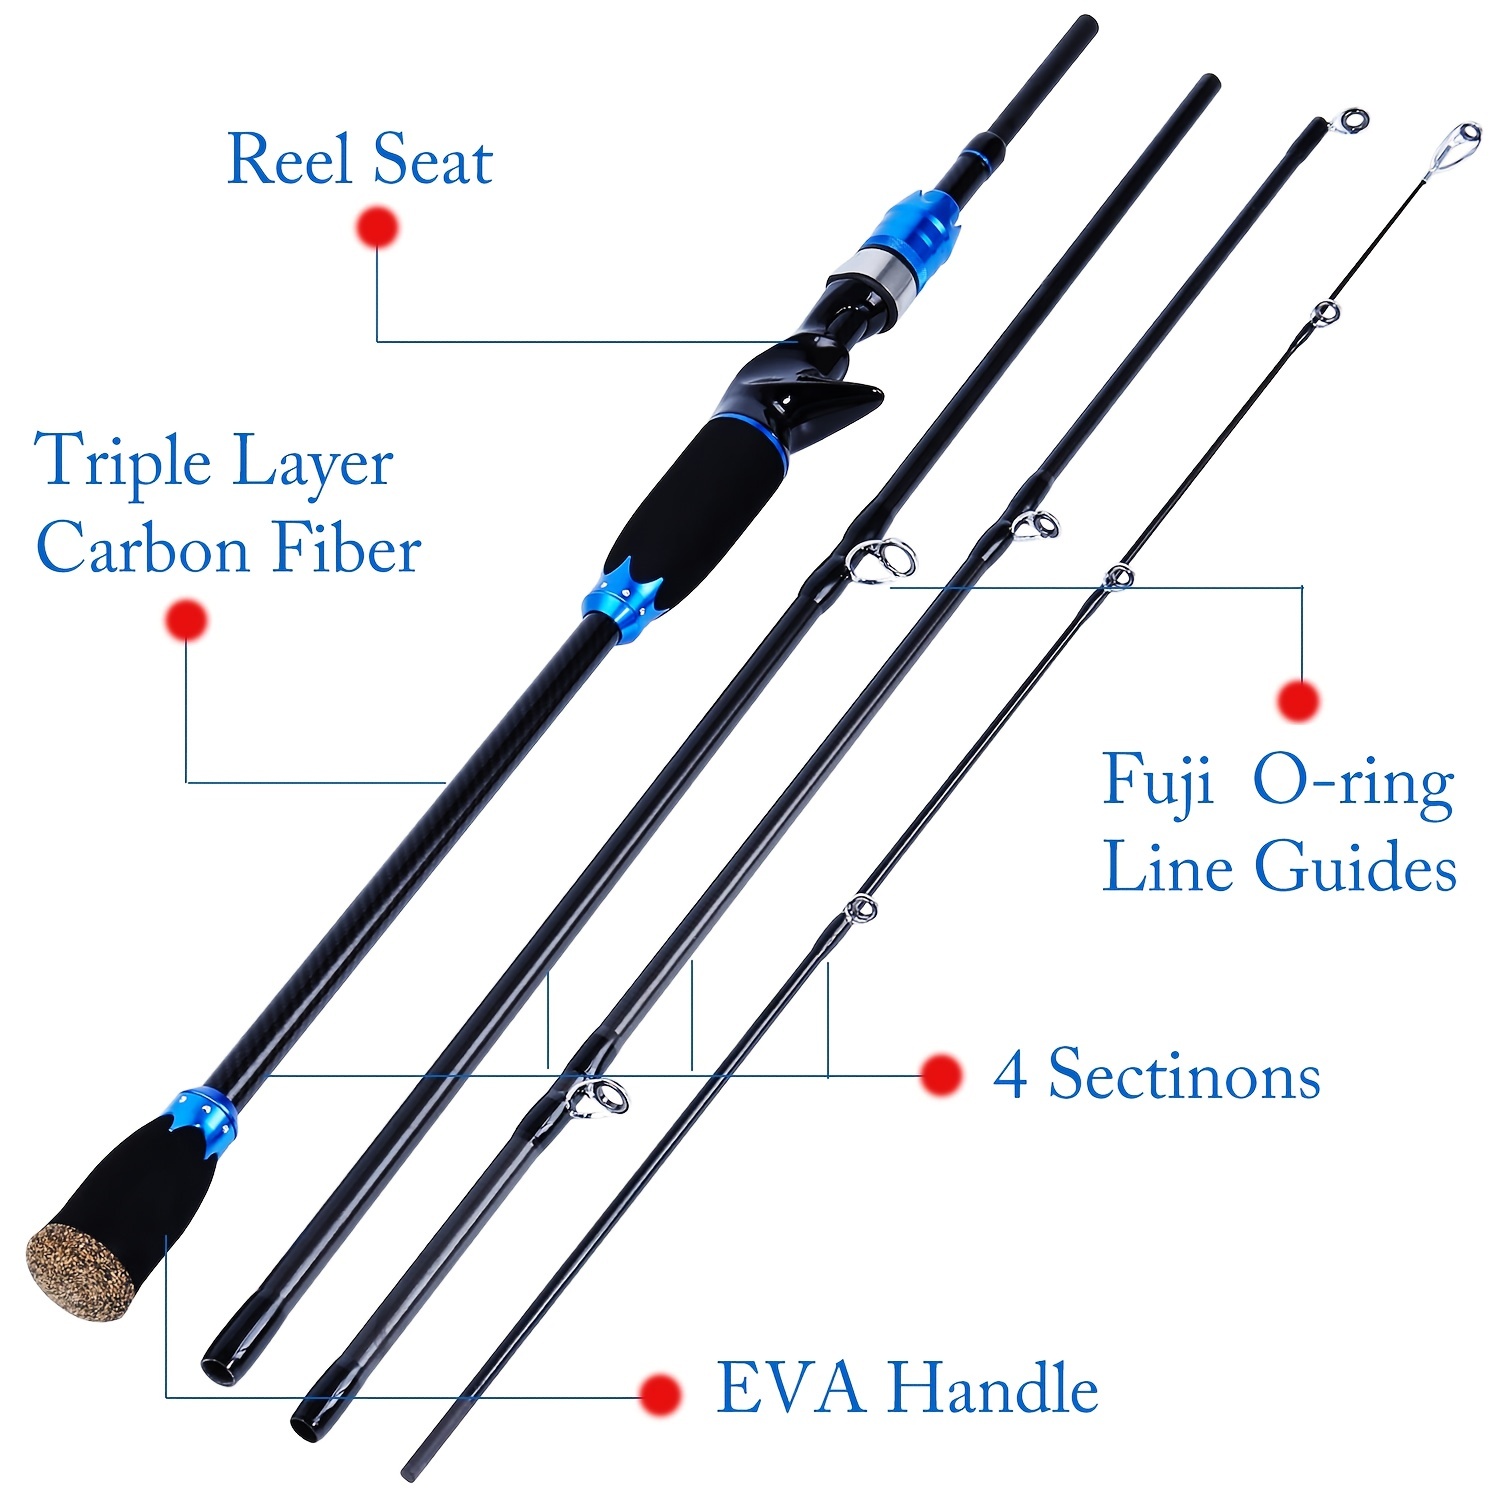 Fishing Pole Fishing Pole 1.8m/2.1m M Power Carbon Fiber Baitcsting  5/6Sections Rod and 18+1BB Left/Right Hand Casting Reel Fishing Combos Set  Fishing